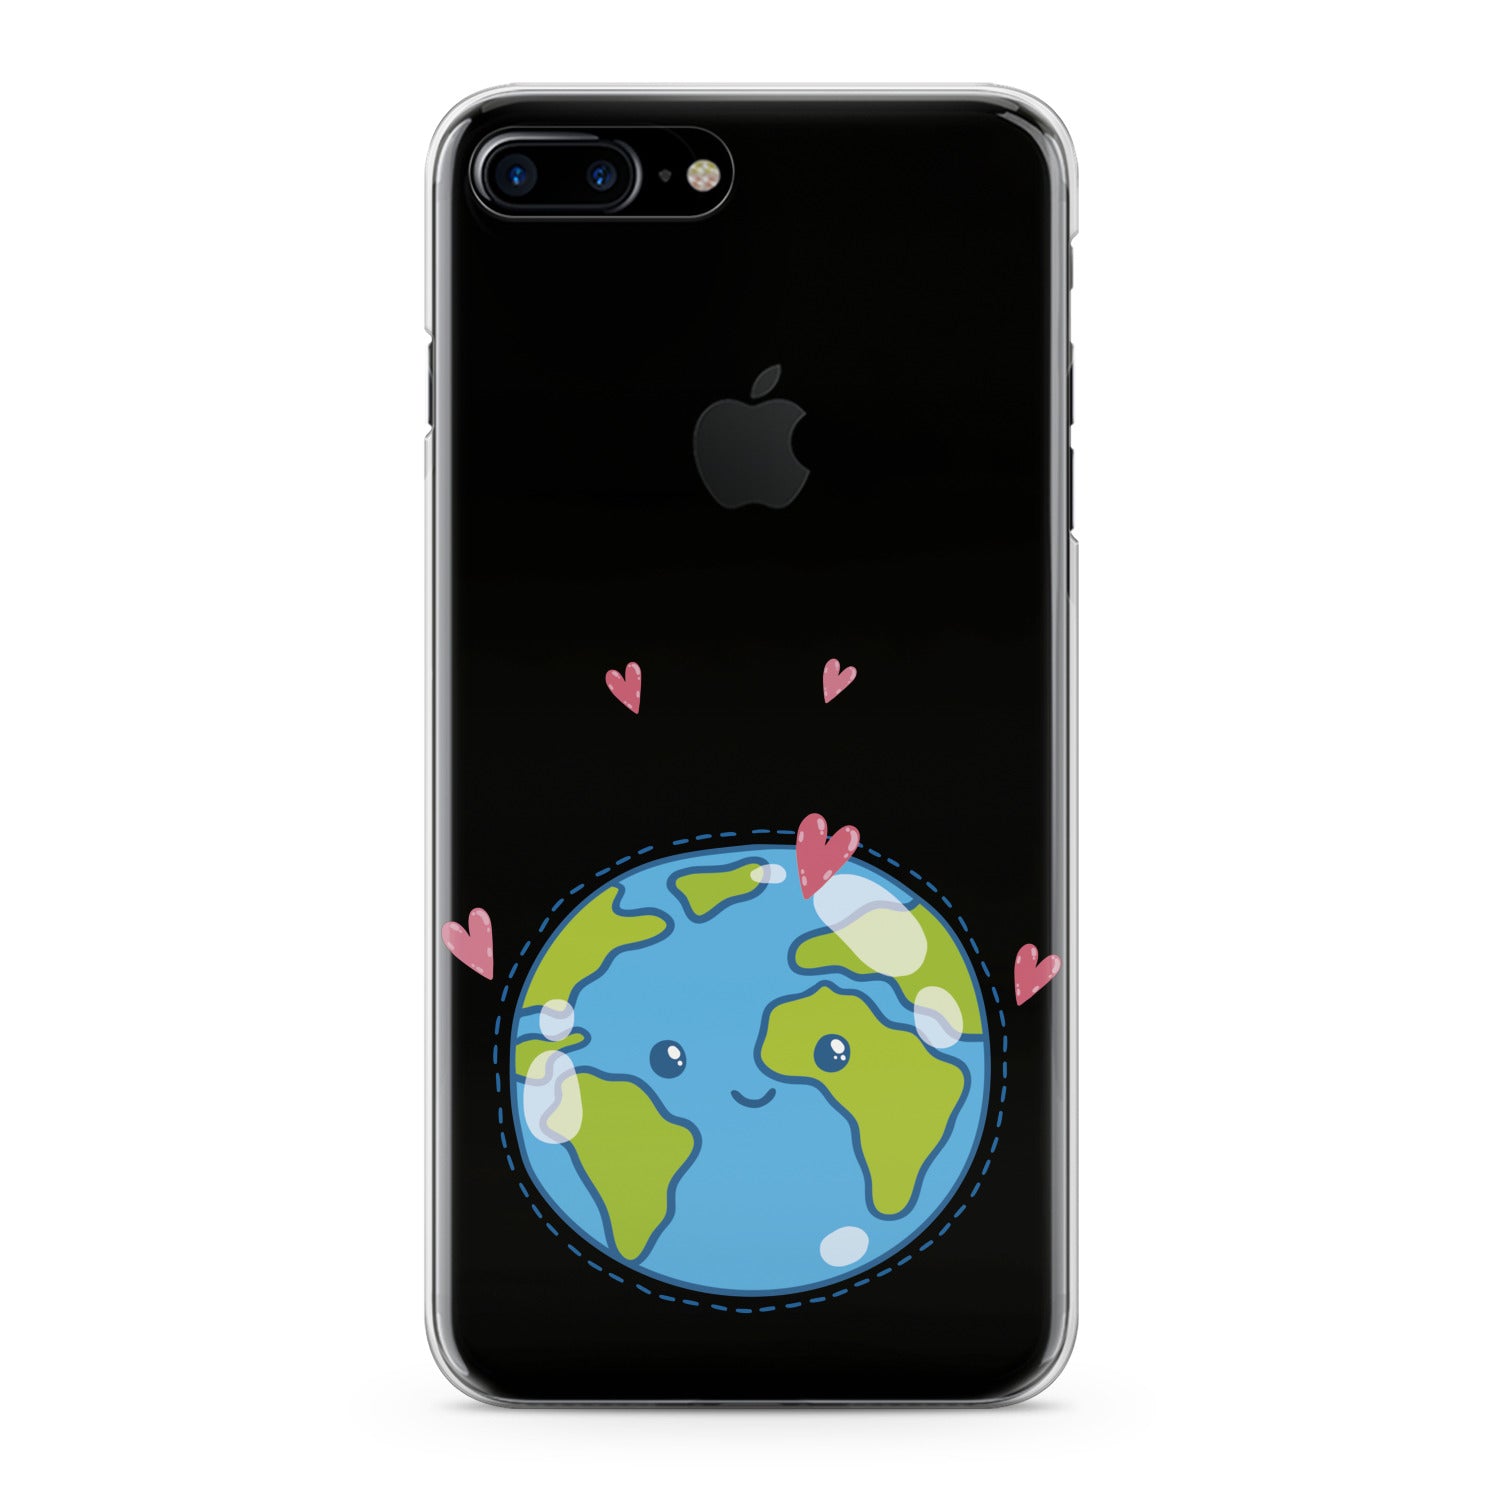 Lex Altern Lovely Earth Phone Case for your iPhone & Android phone.